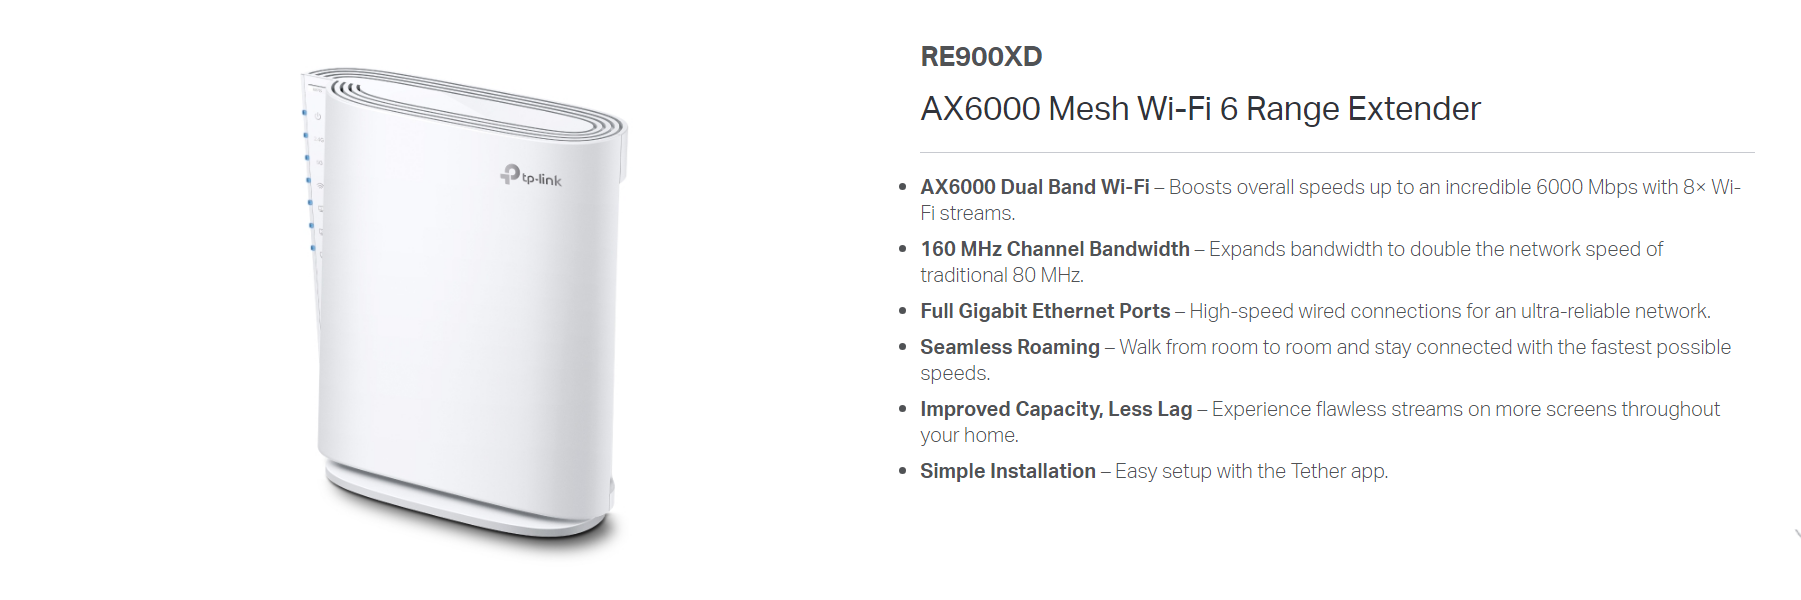 A large marketing image providing additional information about the product TP-Link RE900XD - AX6000 Wi-Fi 6 Mesh Range Extender - Additional alt info not provided